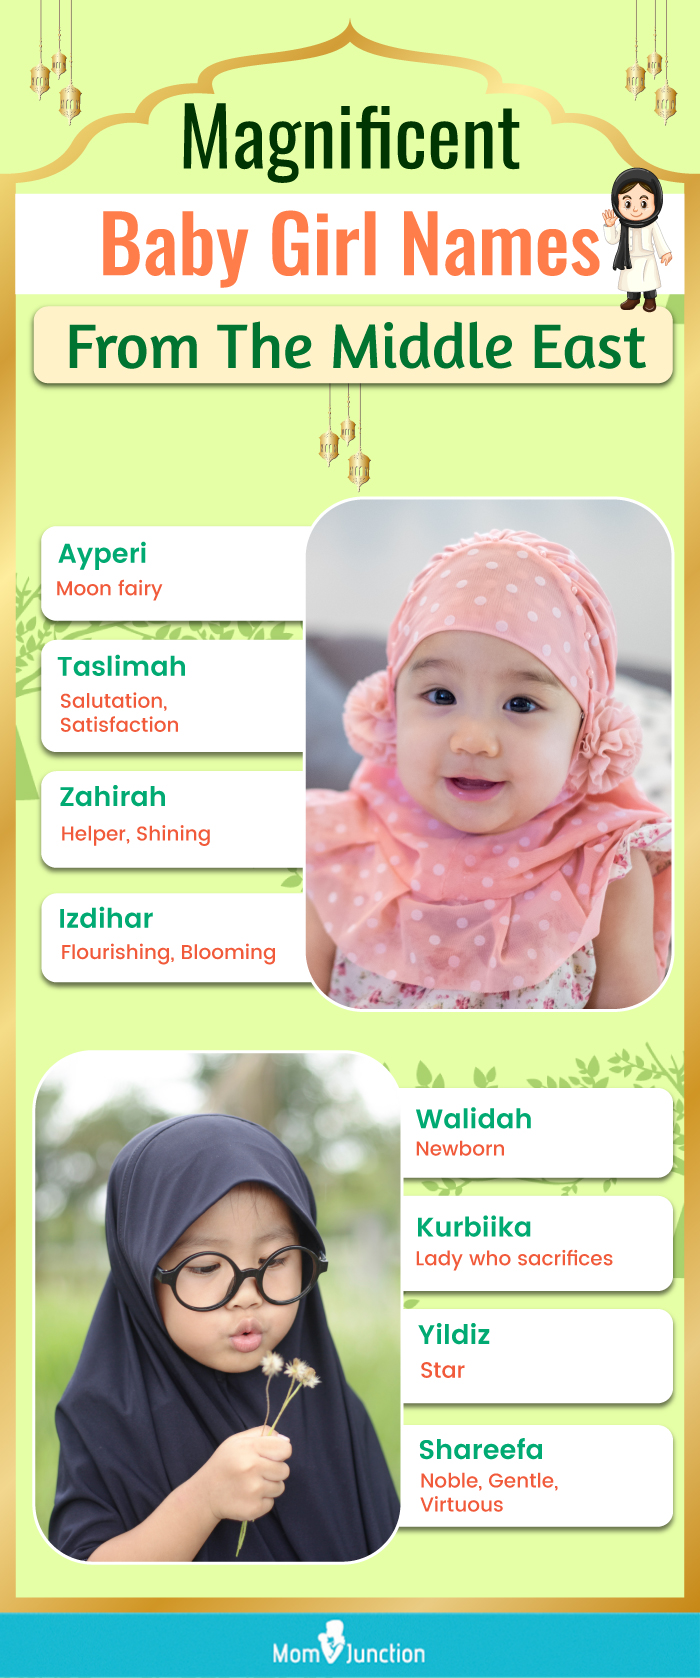 magnificent baby girl names from the middle east (infographic)